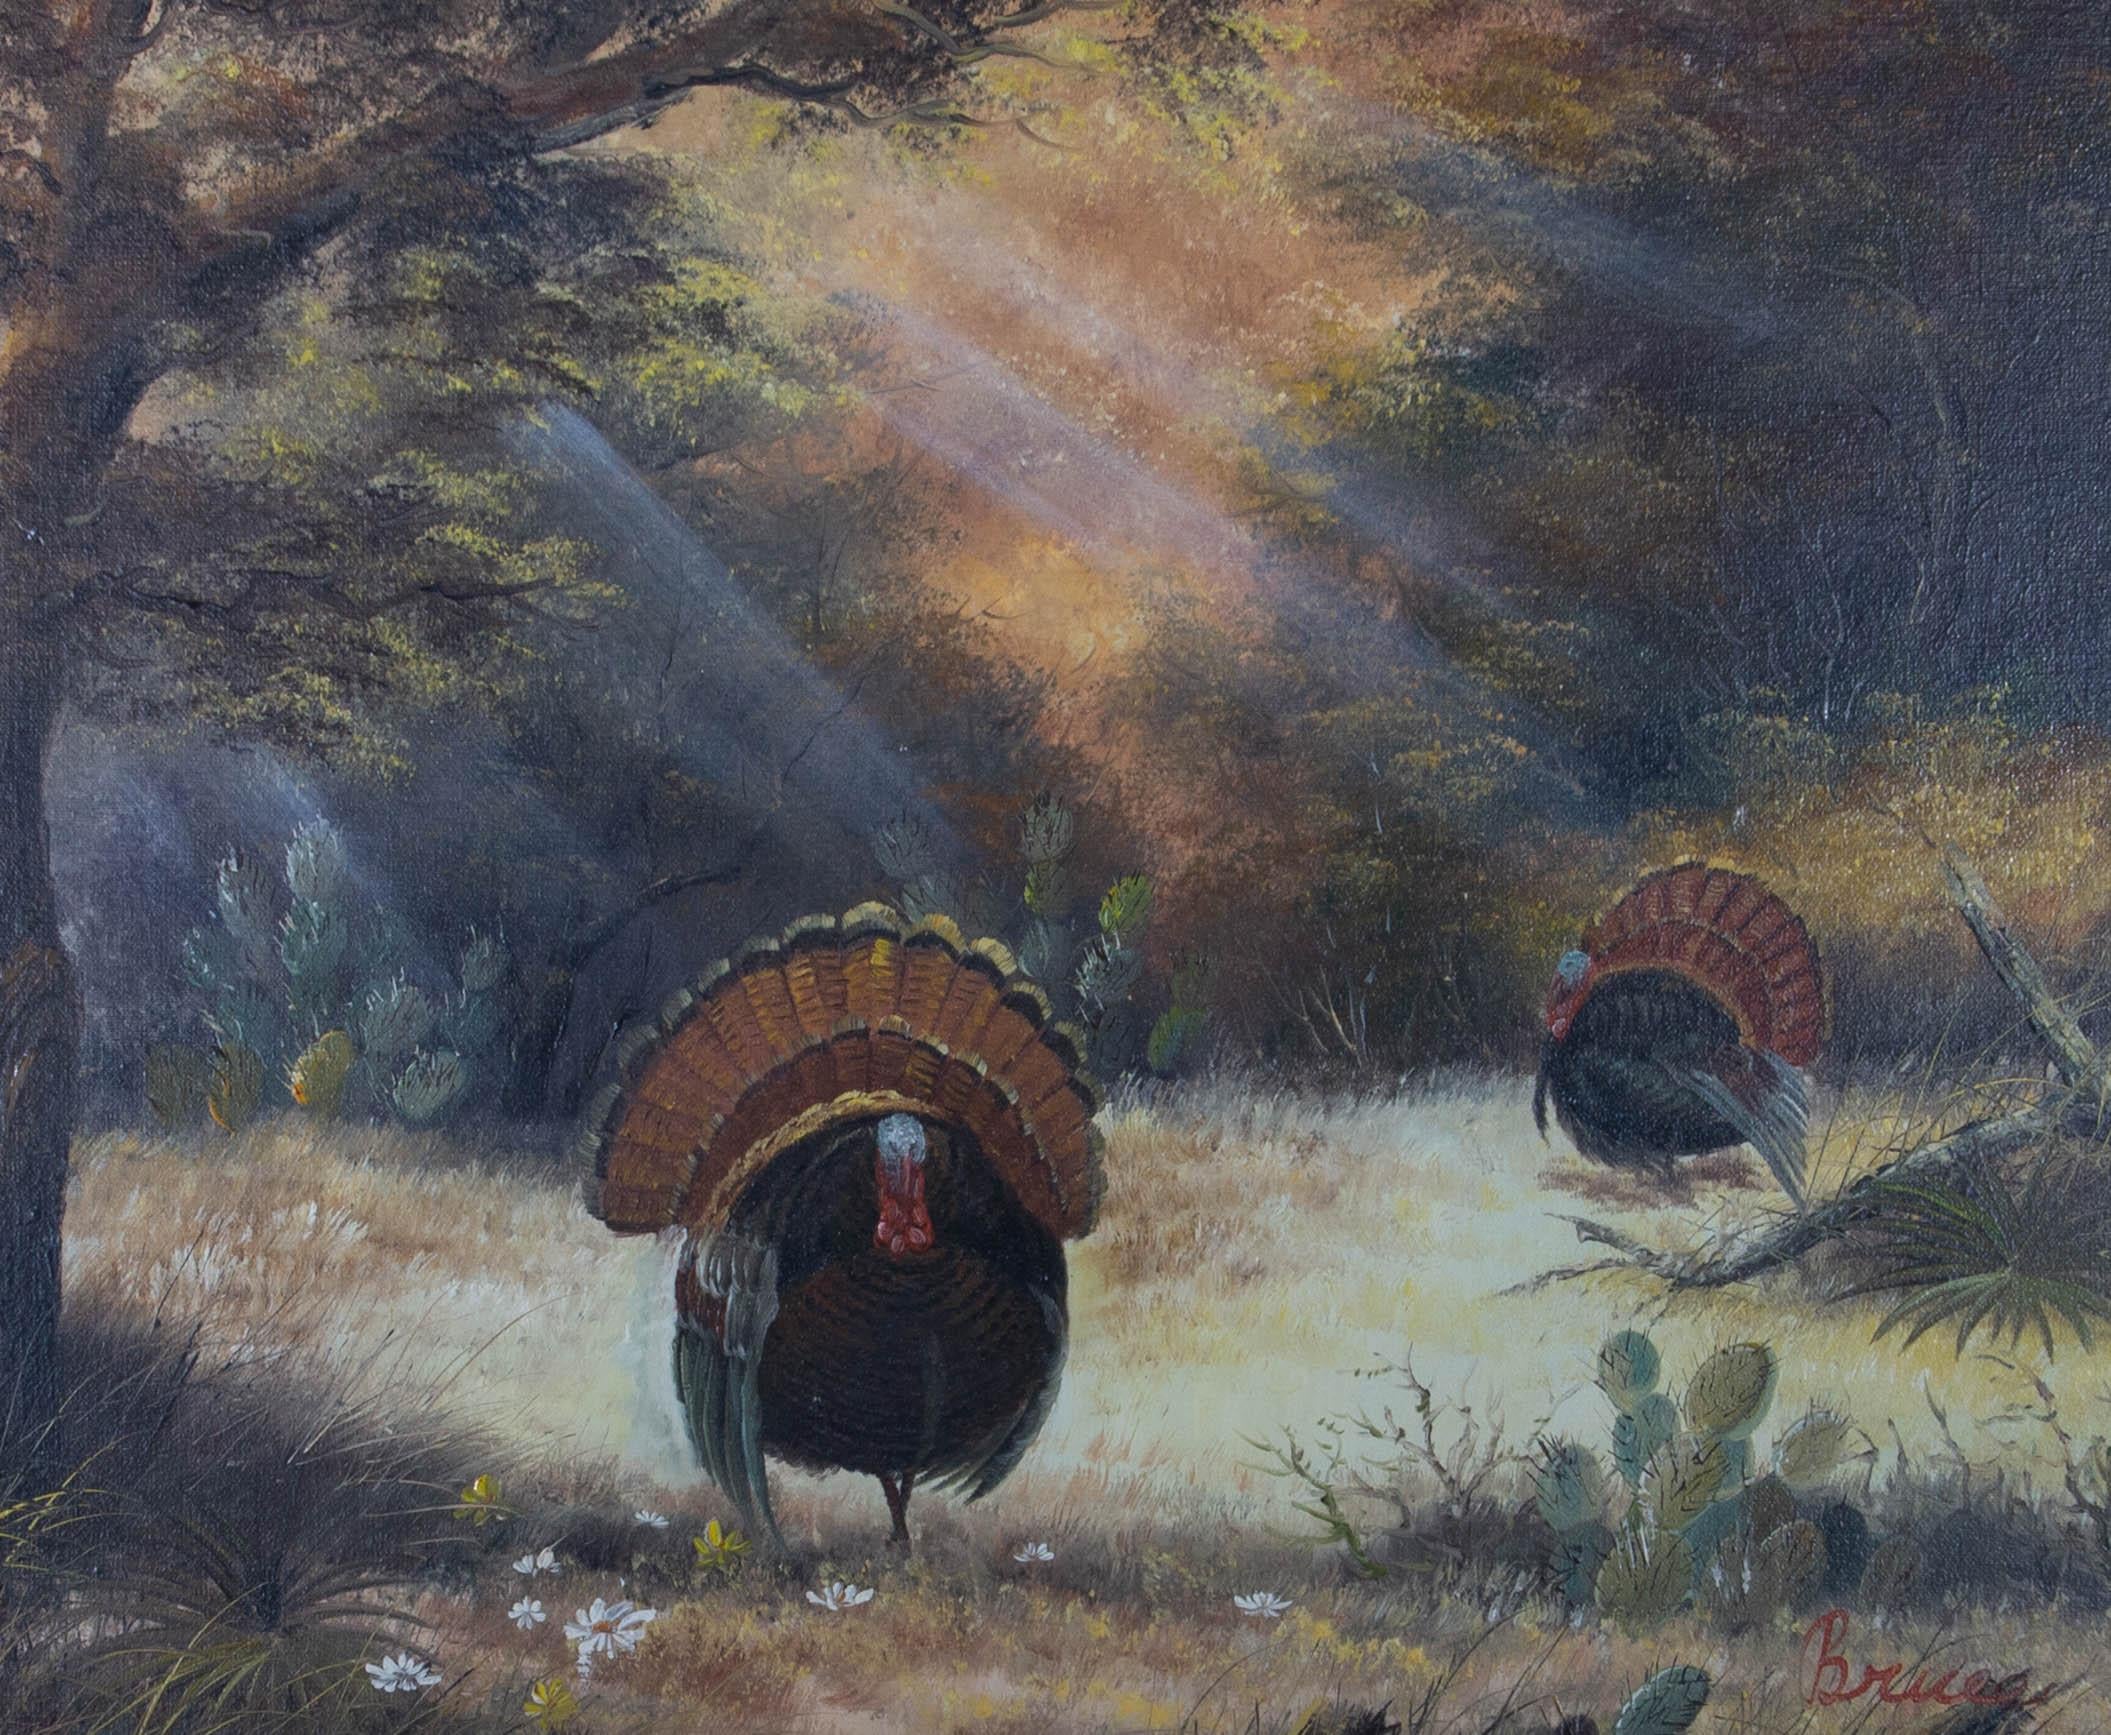 An accomplished acrylic painting, depicting a landscape view with two turkeys. Signed to the lower right-hand corner. Well-presented in a bird's eye maple frame, as shown. On canvas board.